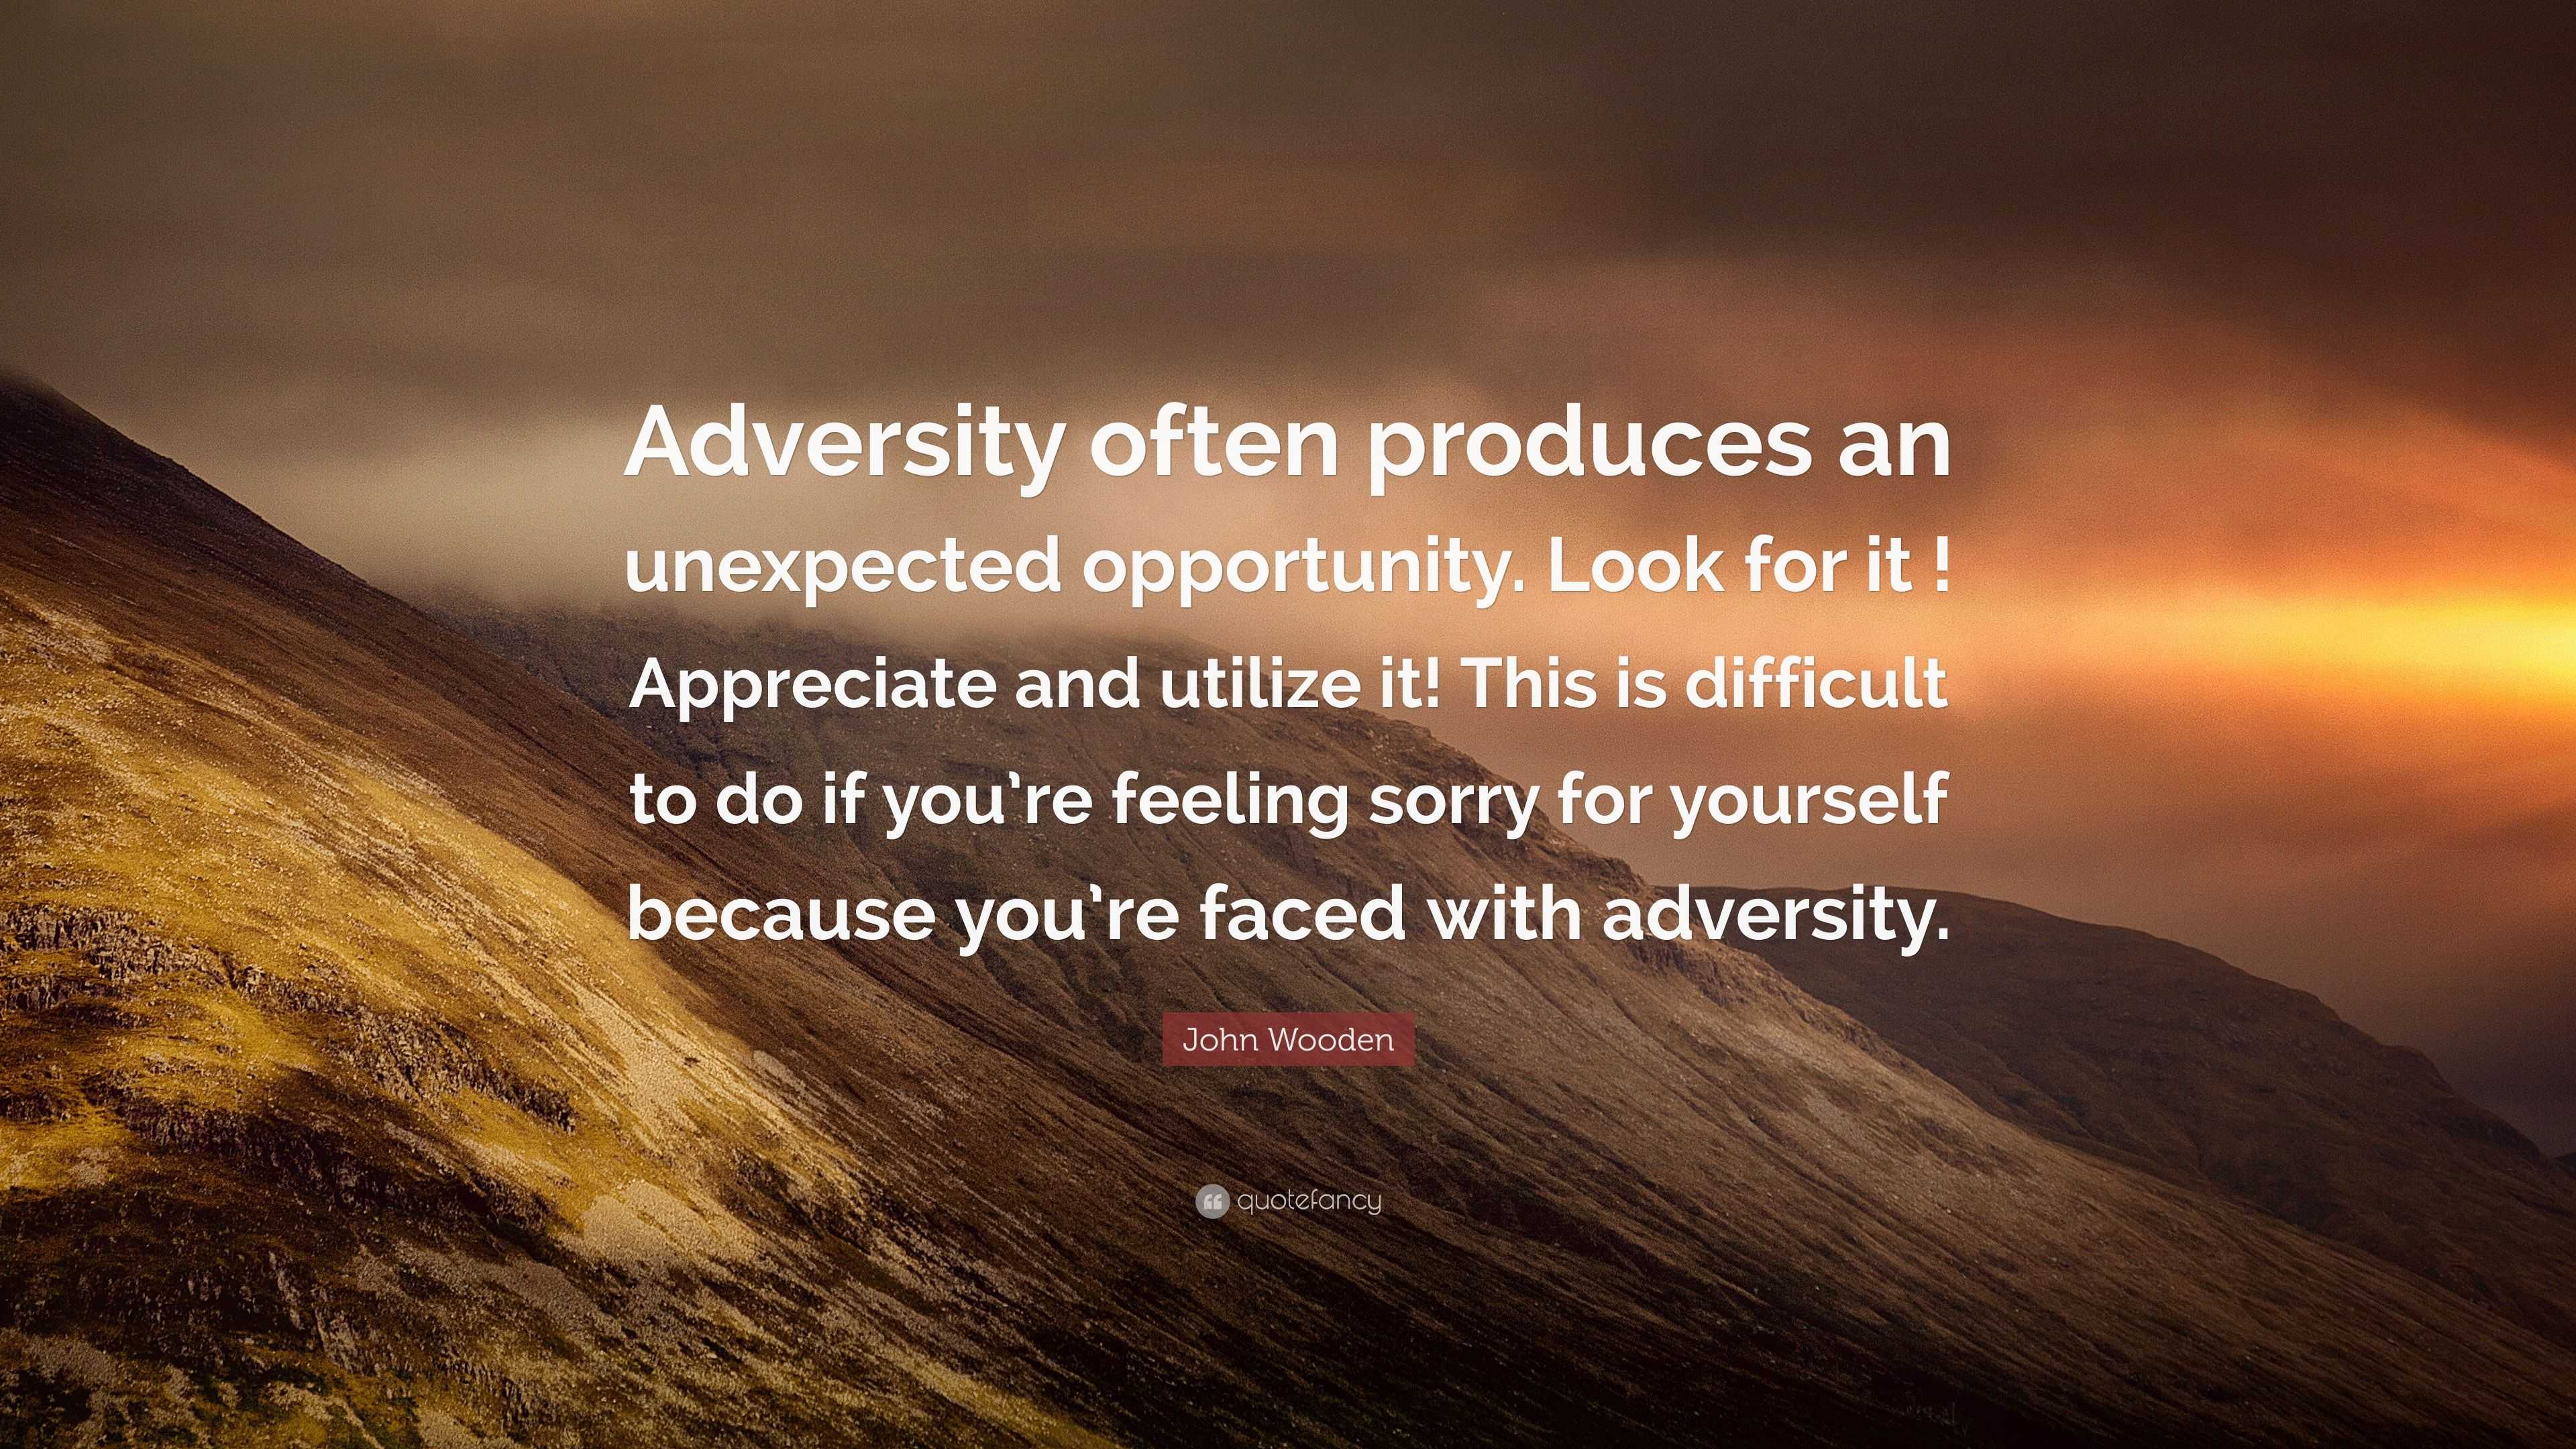 John Wooden Quote “Adversity often produces an unexpected